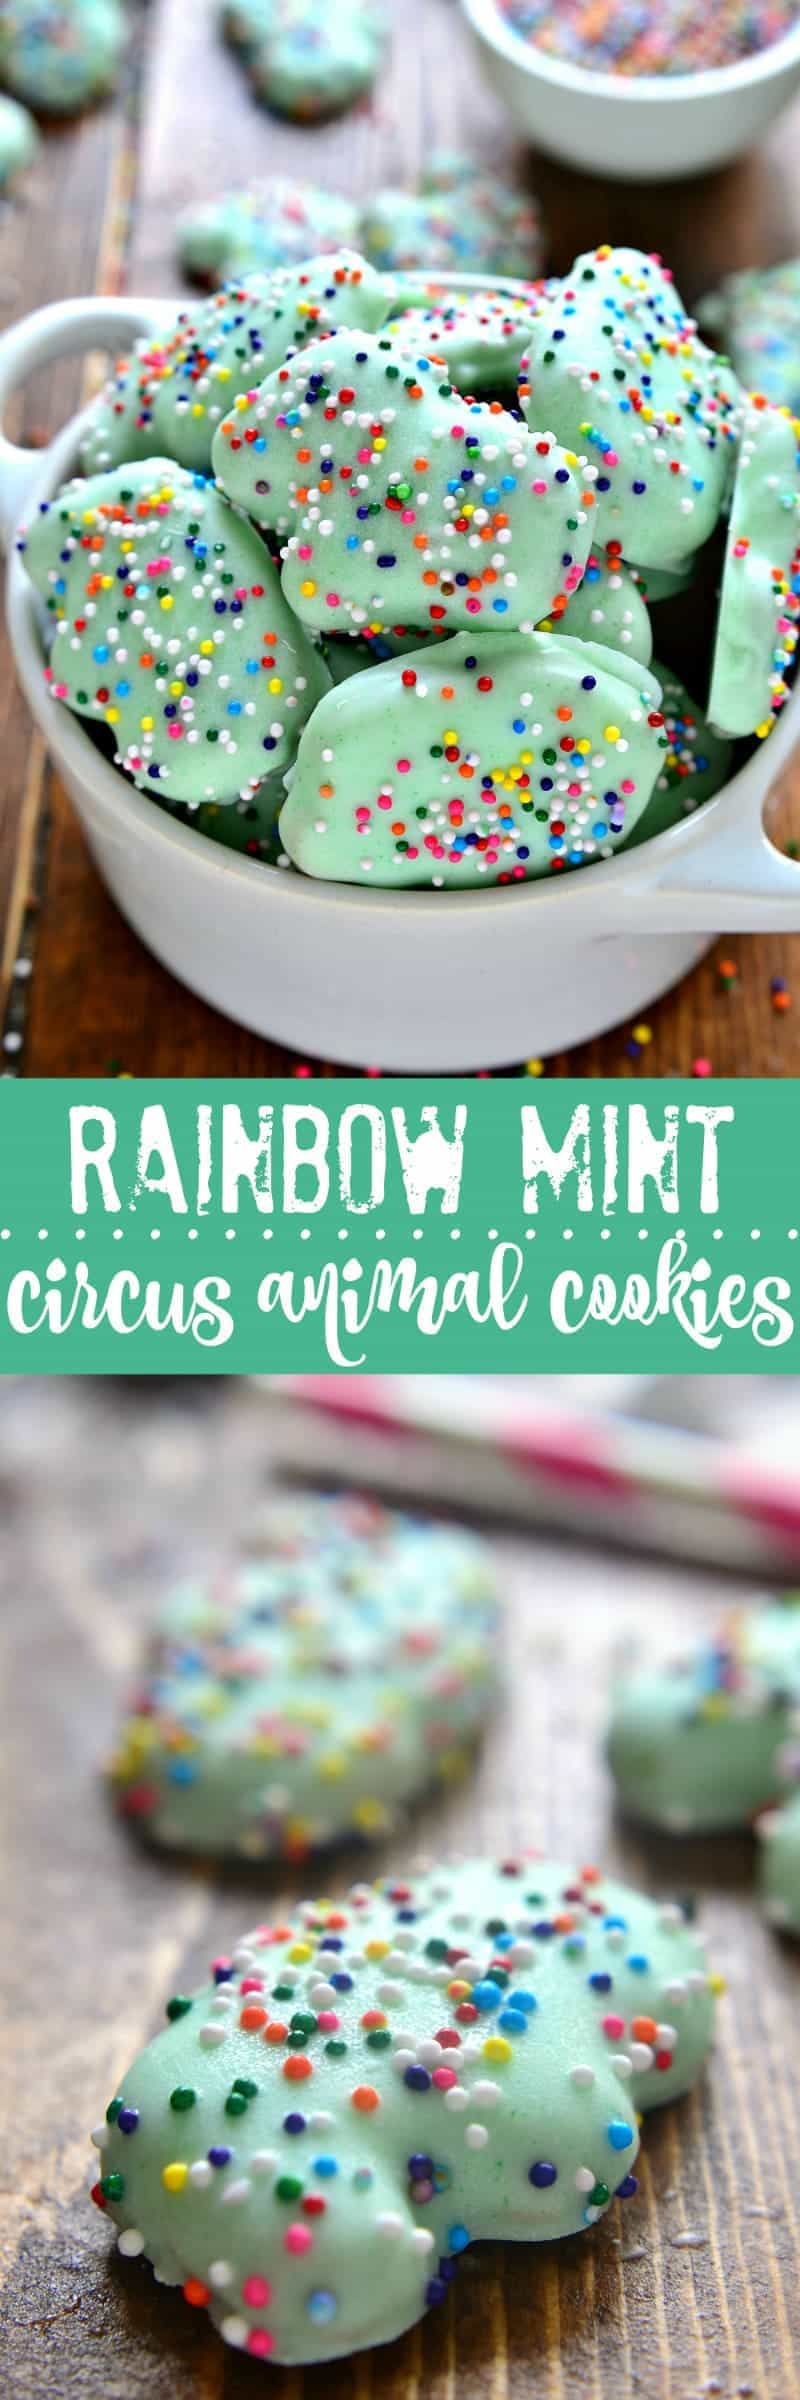 Homemade Mint Circus Animal Cookies with rainbow sprinkles! Perfect for mint lovers, perfect for St. Patrick's Day!